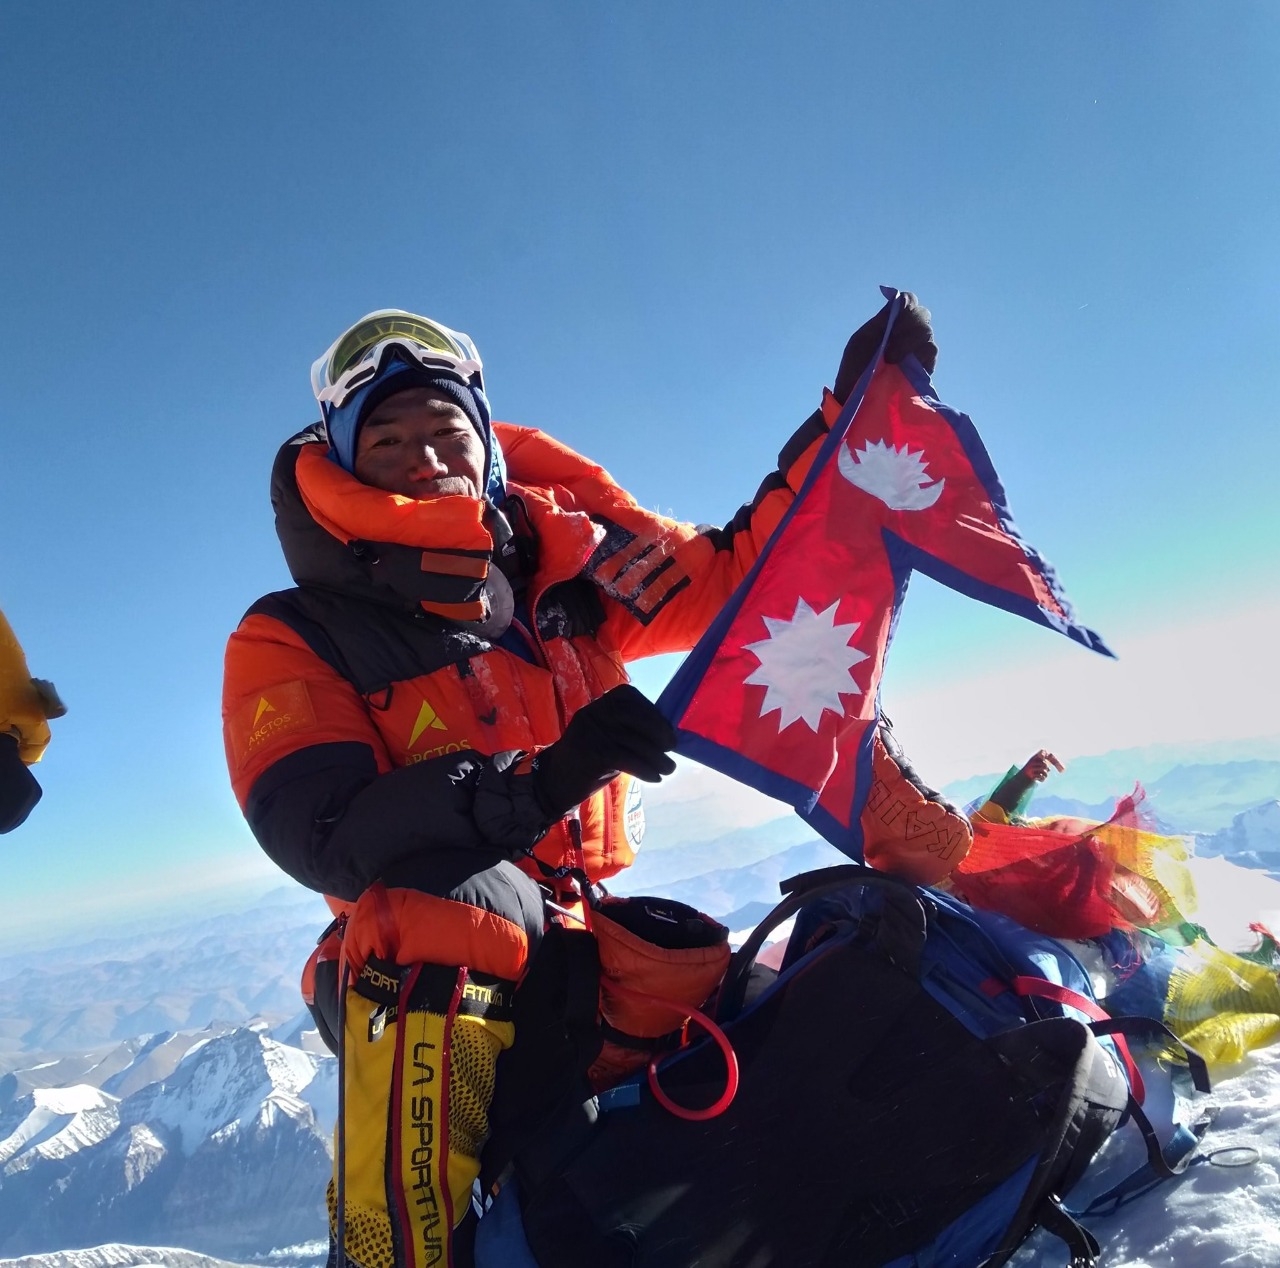  Nepal's Kami Rita Sherpa Climbs Mt. Everest For Record 28th Time-TeluguStop.com